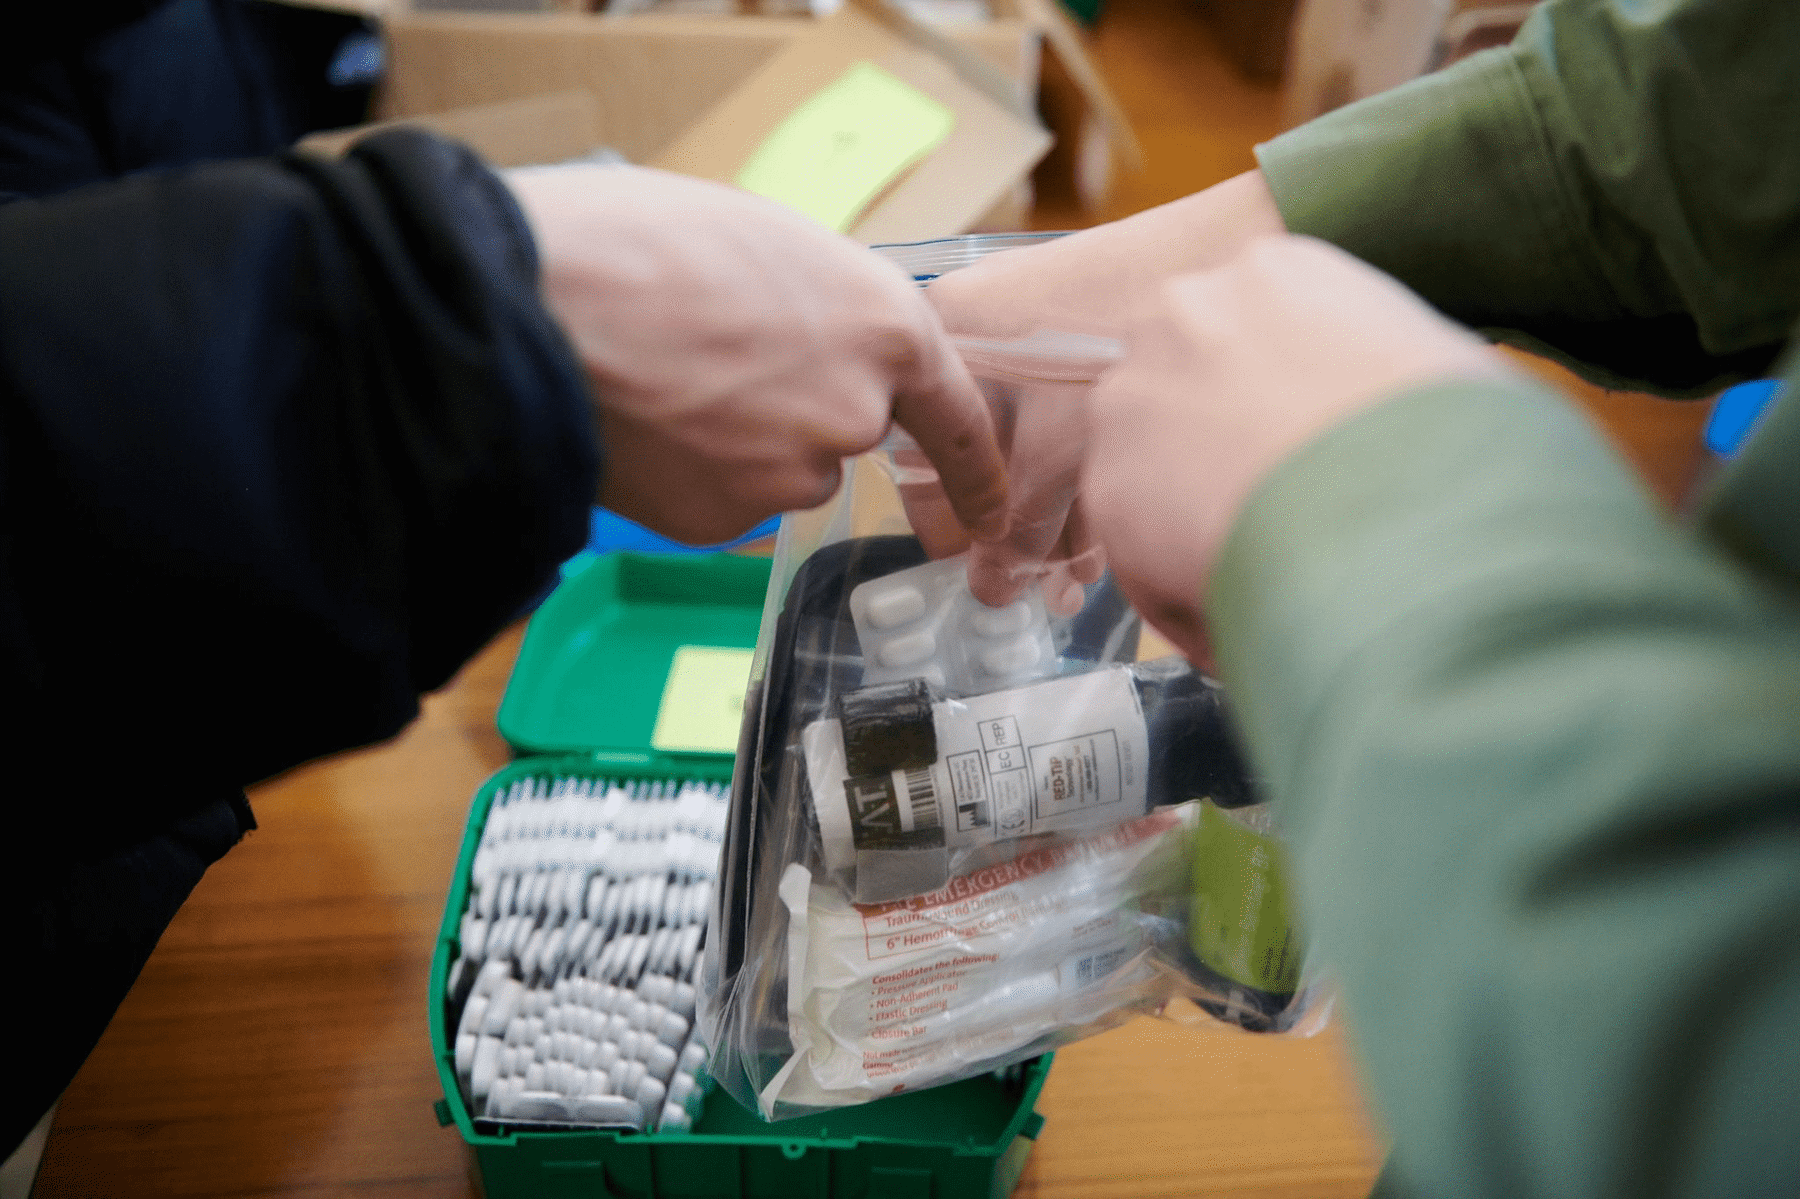 Two pairs of hands are helping to put medicines and first aid equipment in a ziplock bag.